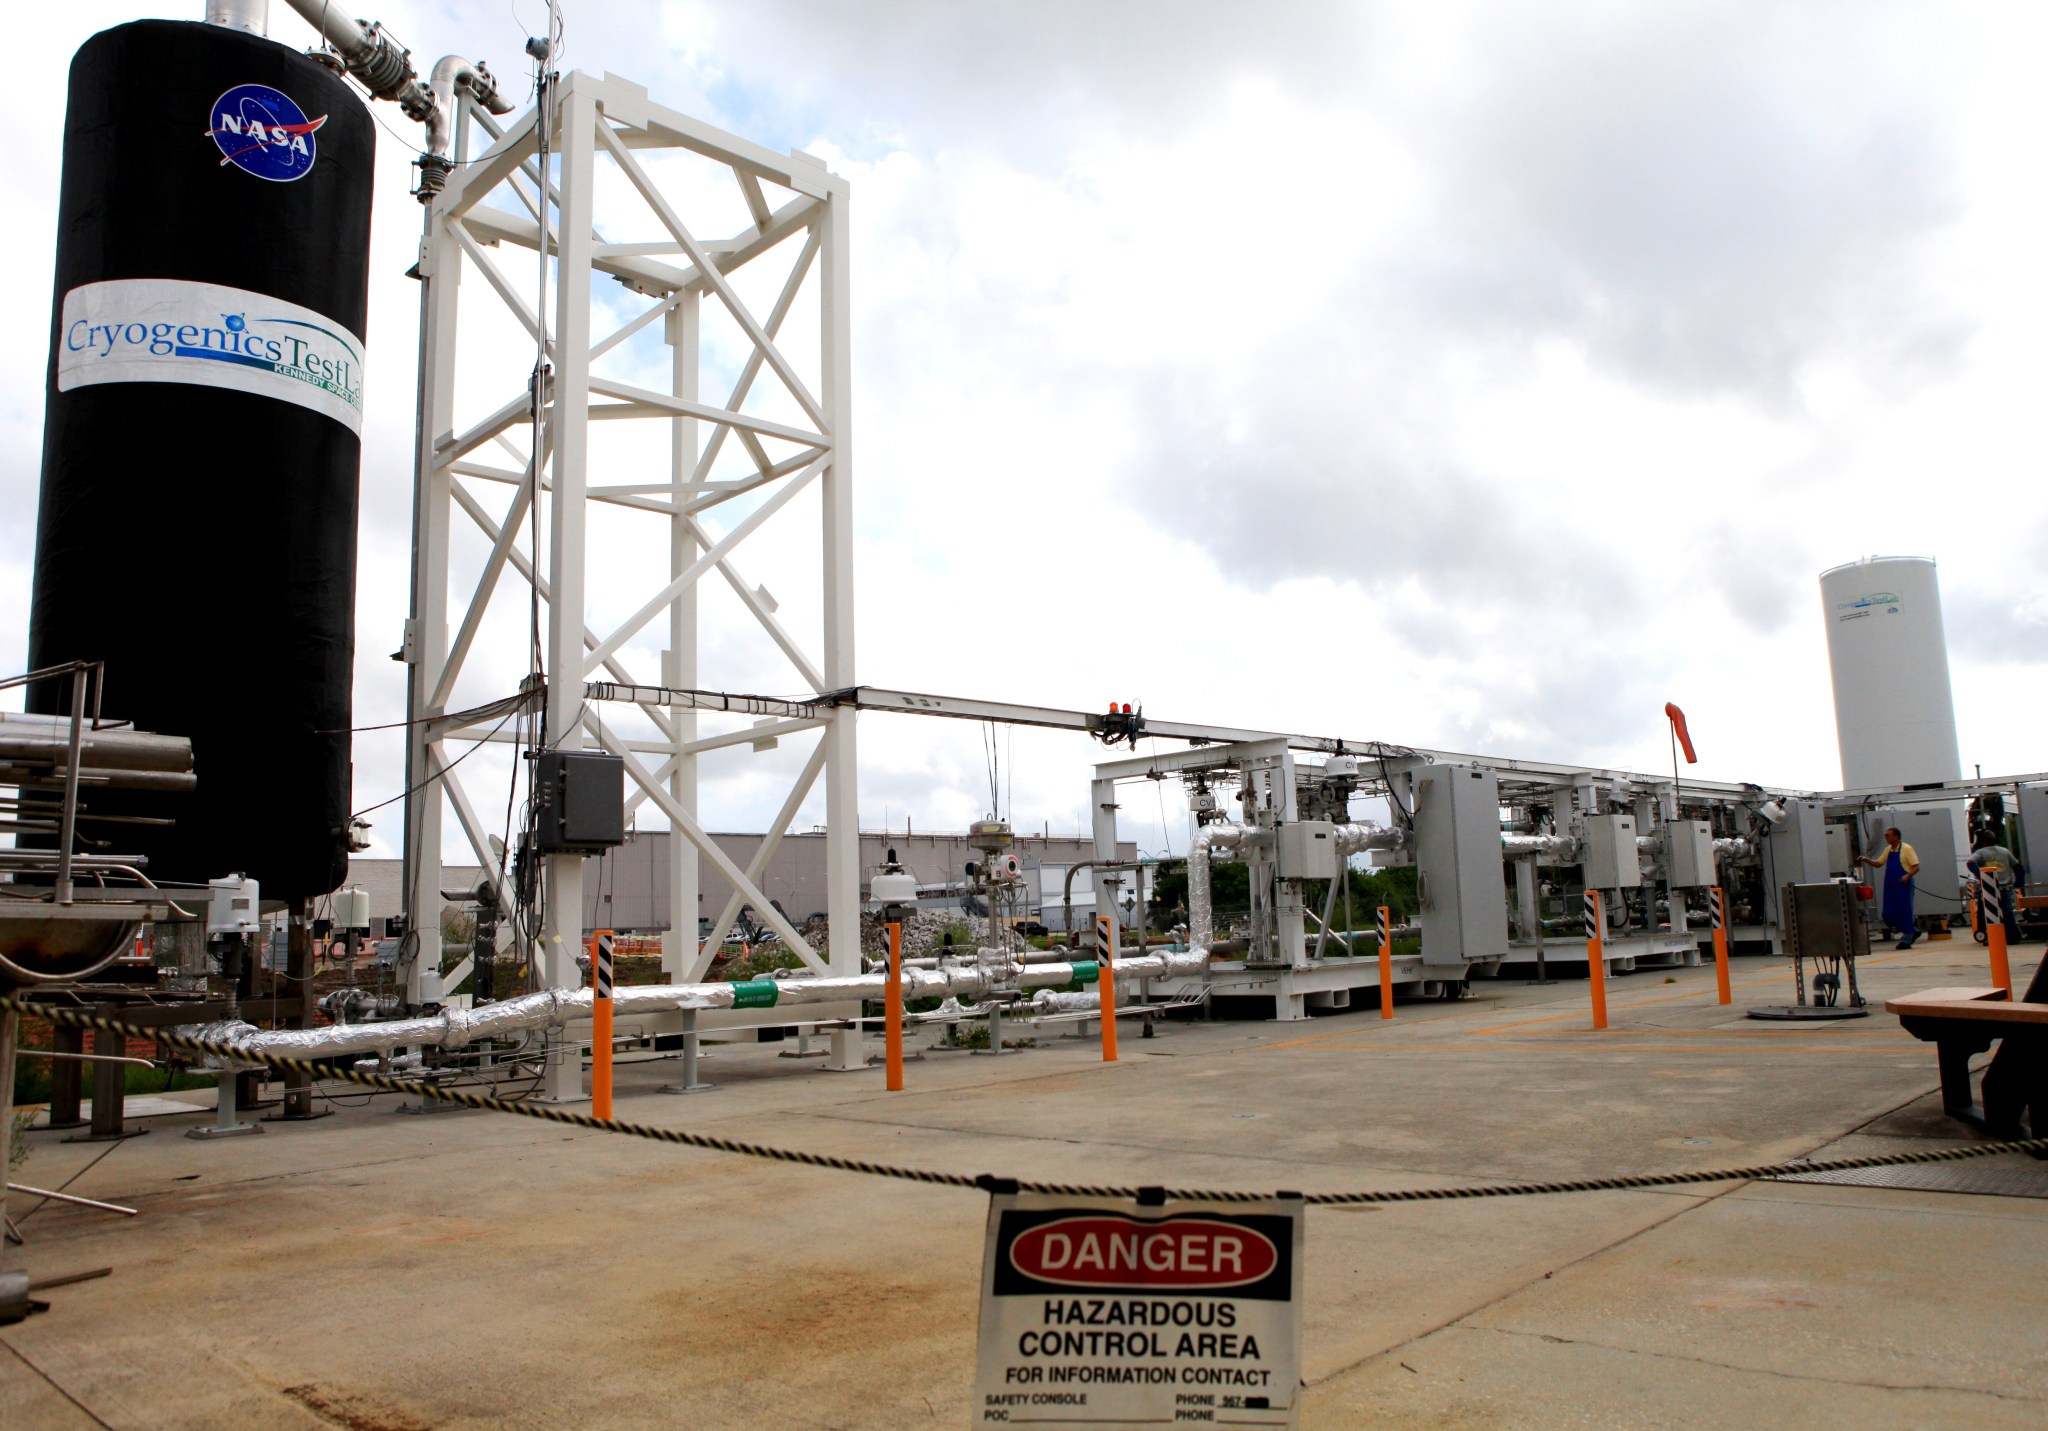 The Kennedy Space Center's Cryogenic Test Laboratory